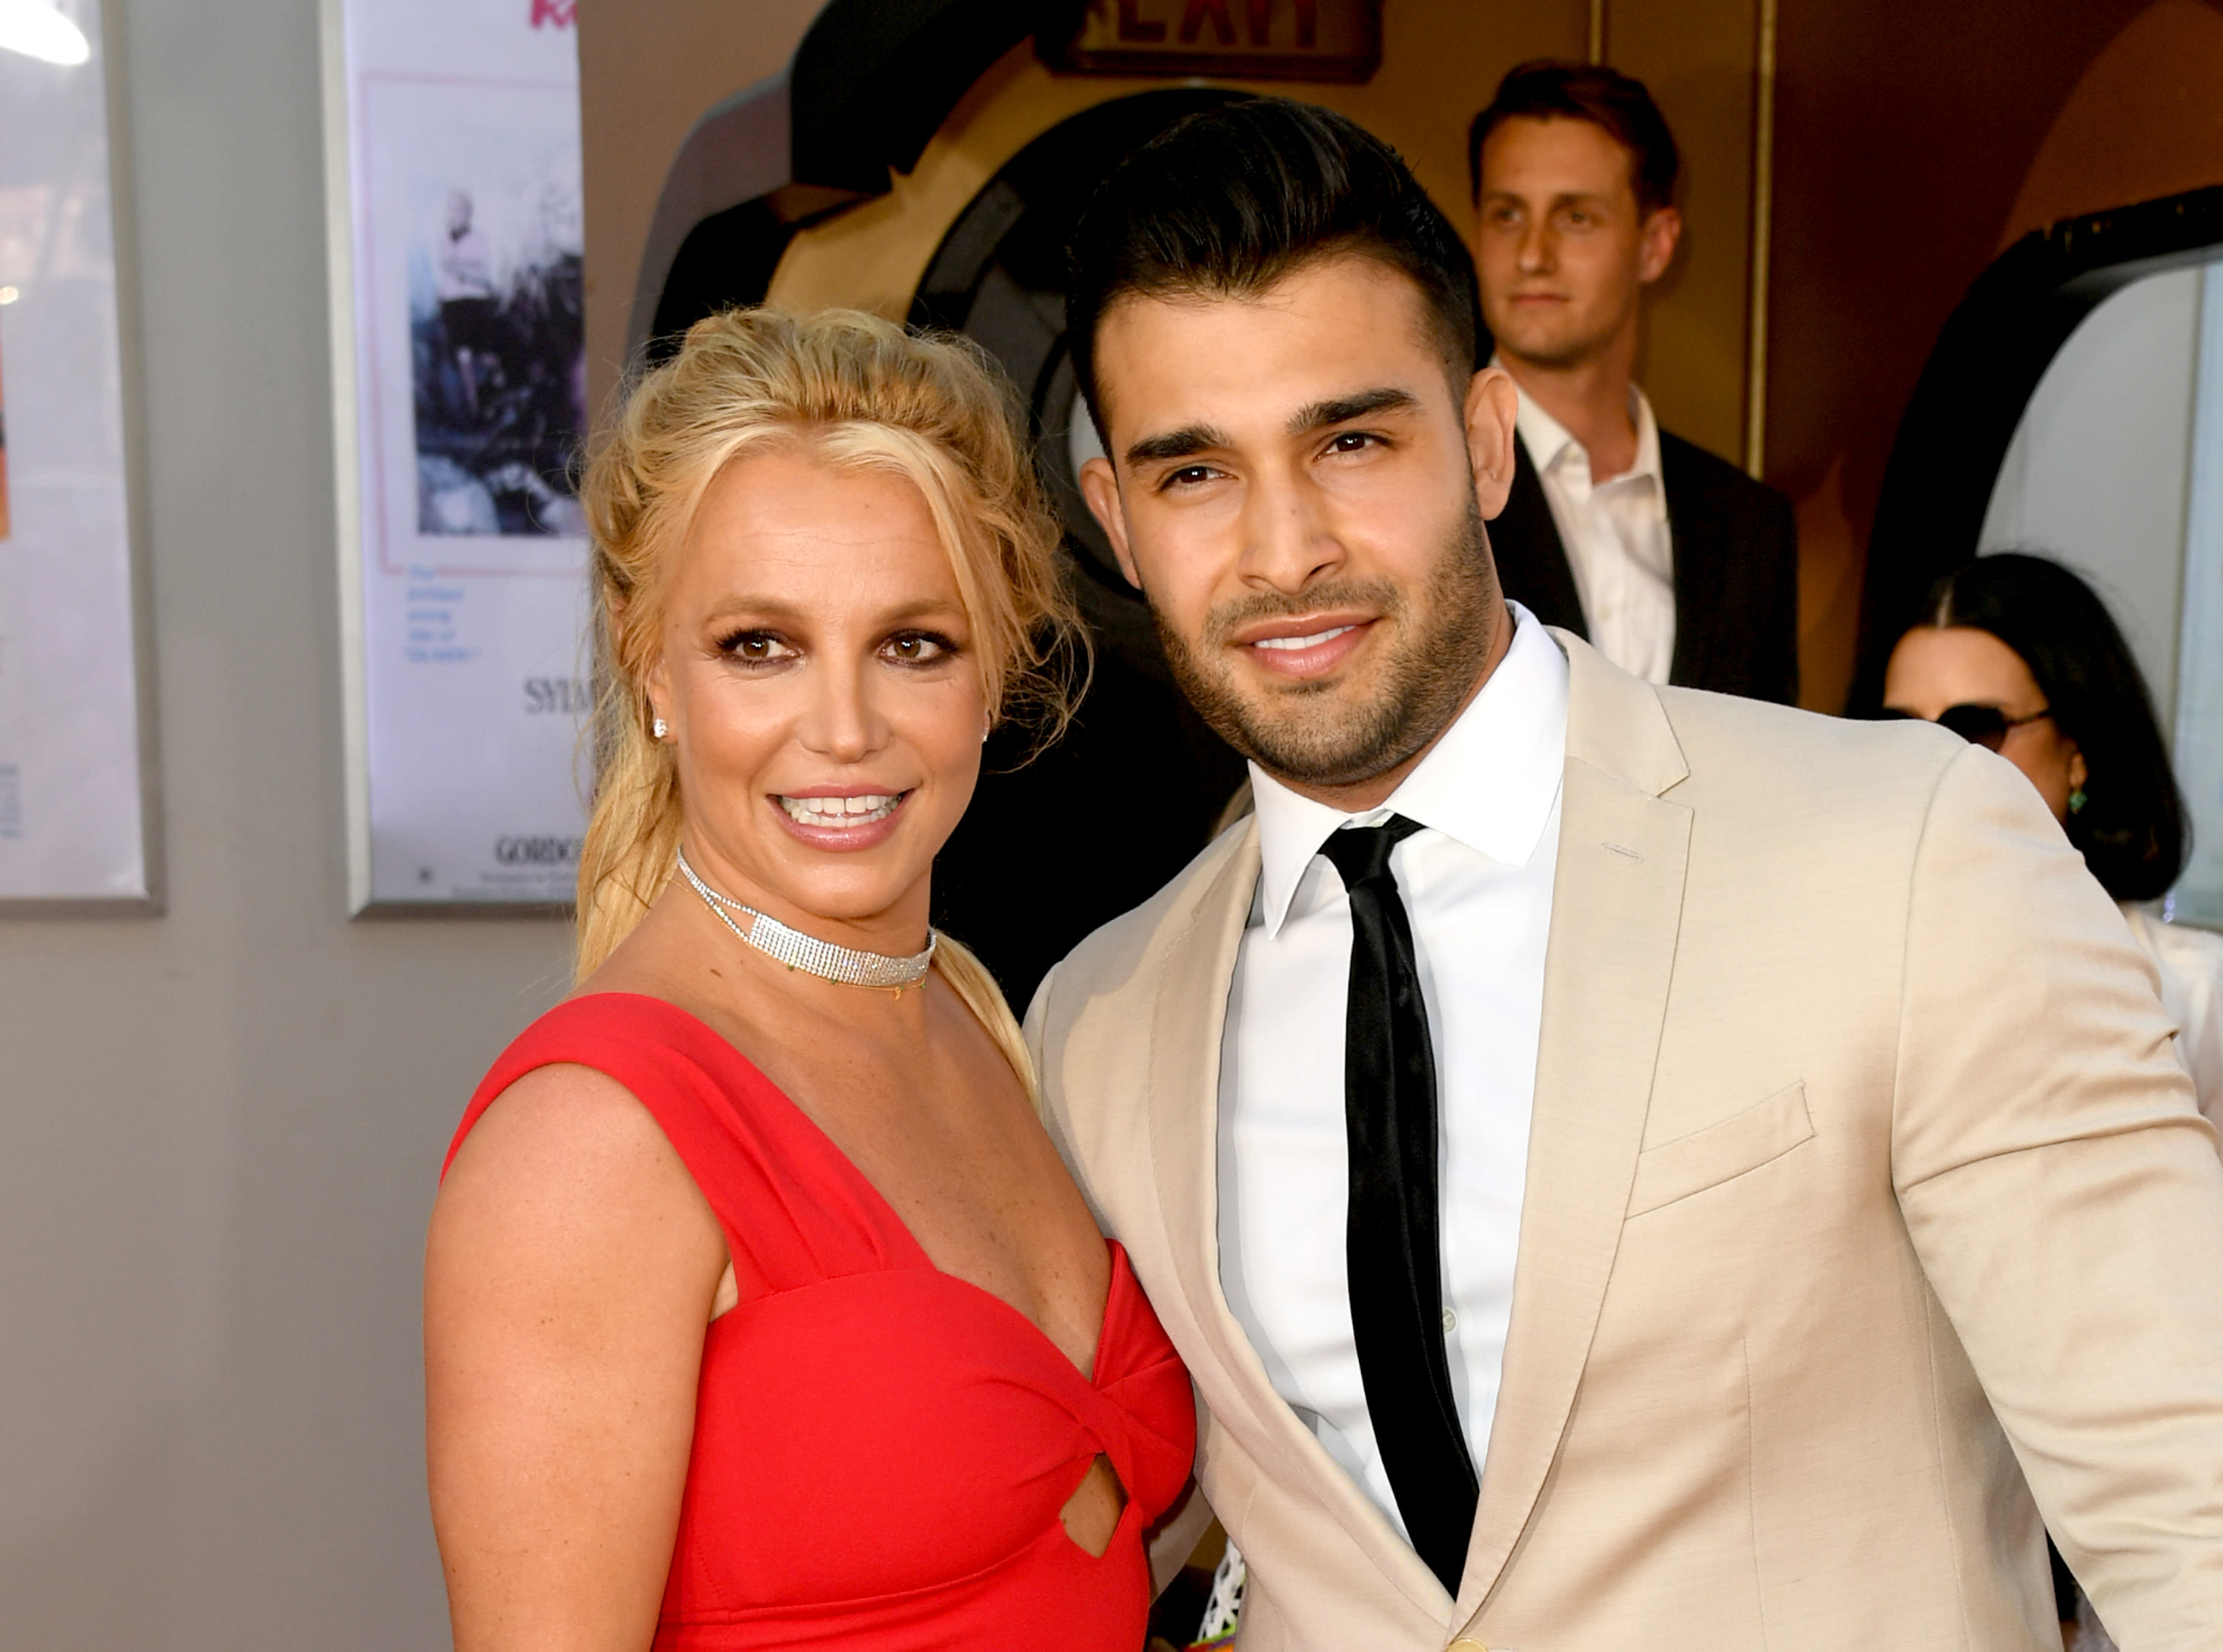 Britney Spears’ Ex Sam Asghari ‘Hopes She Is OK’ After Alleged Fight With Rumored BF Paul Soliz